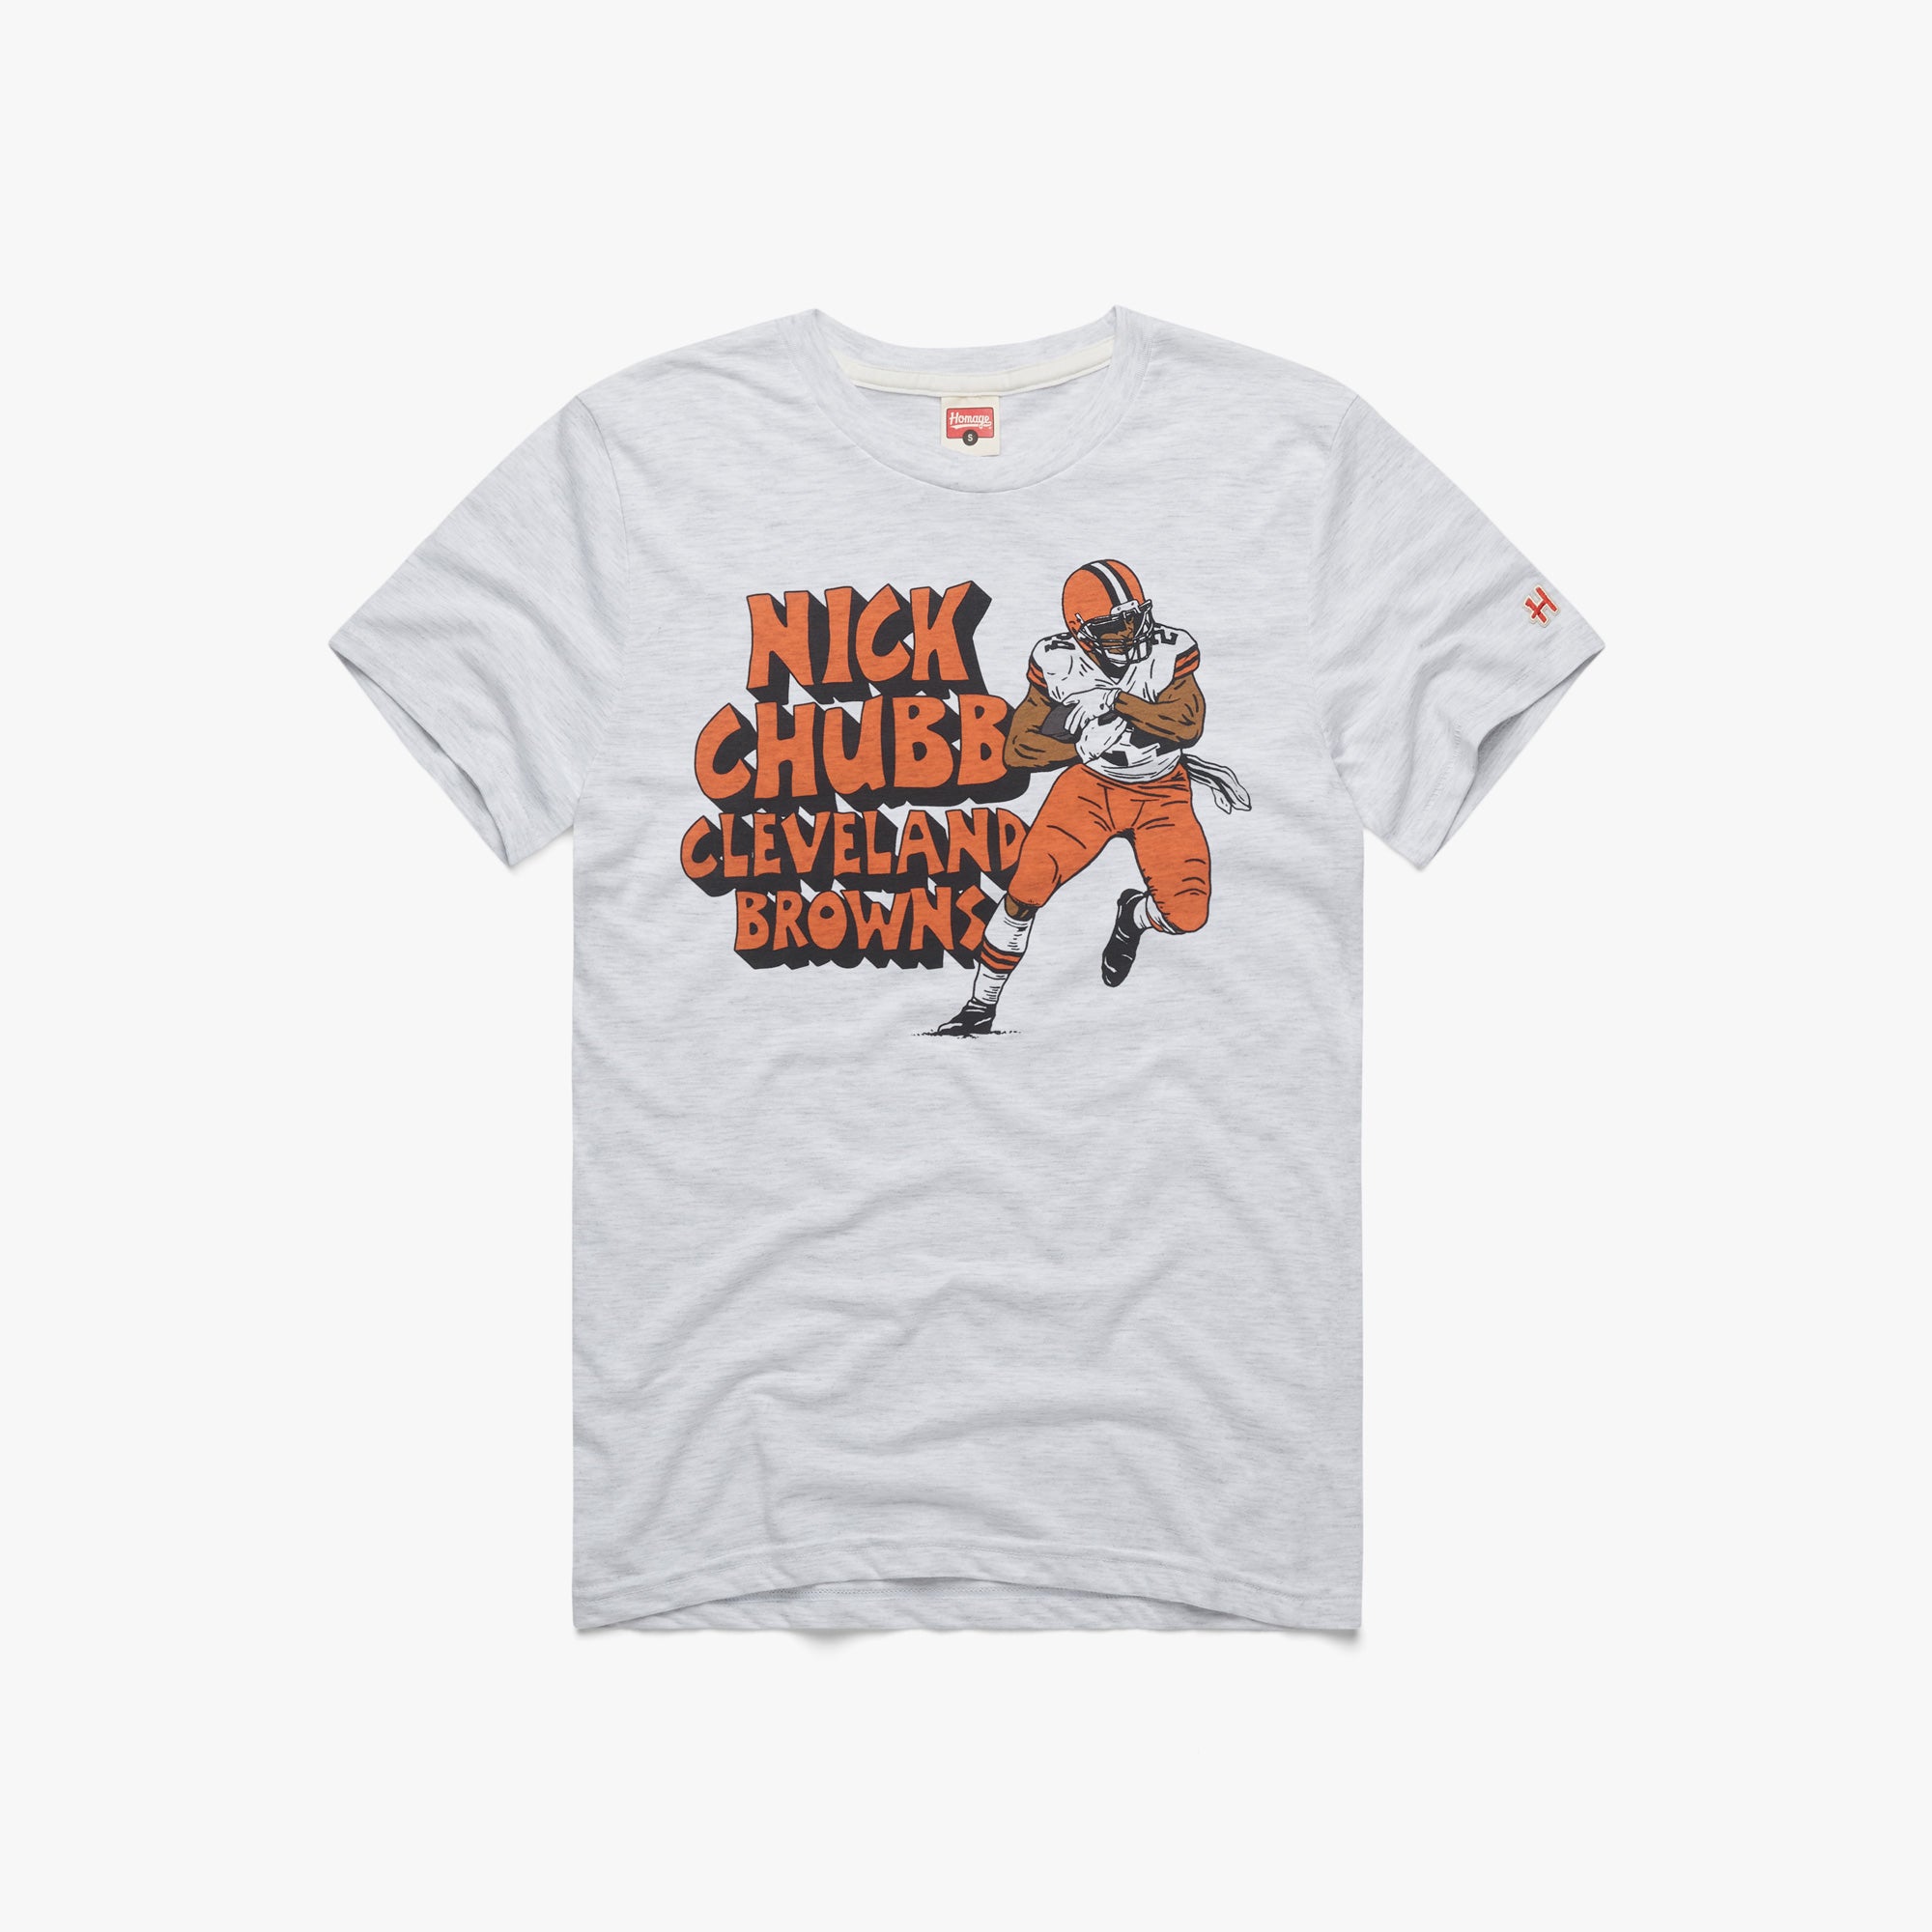 Ohio T-shirt company Where I'm From selling exclusive Browns gear at  FirstEnergy Stadium 